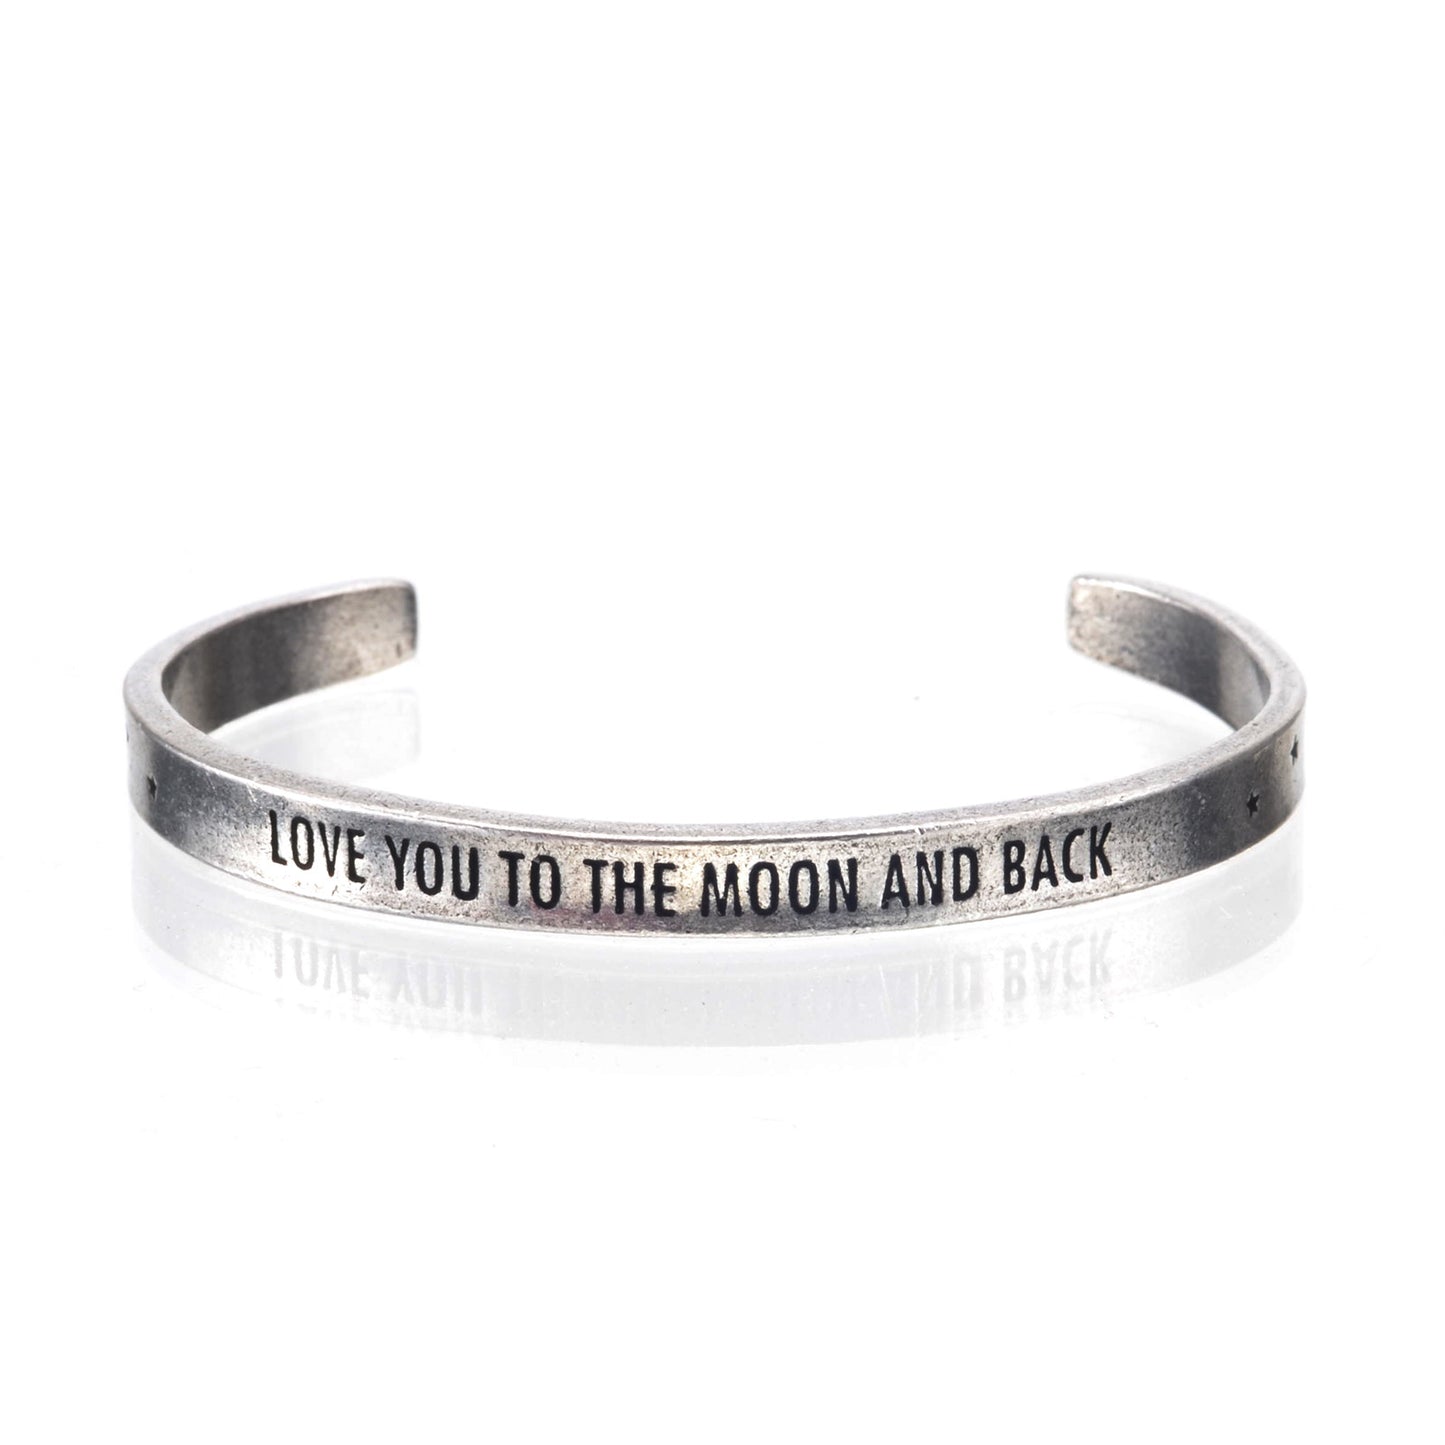 Love You to the Moon and Back - Perfect Gift for Mom or Wife, or Birthday Present for Daughter or  Best Friend by Quotable Cuffs